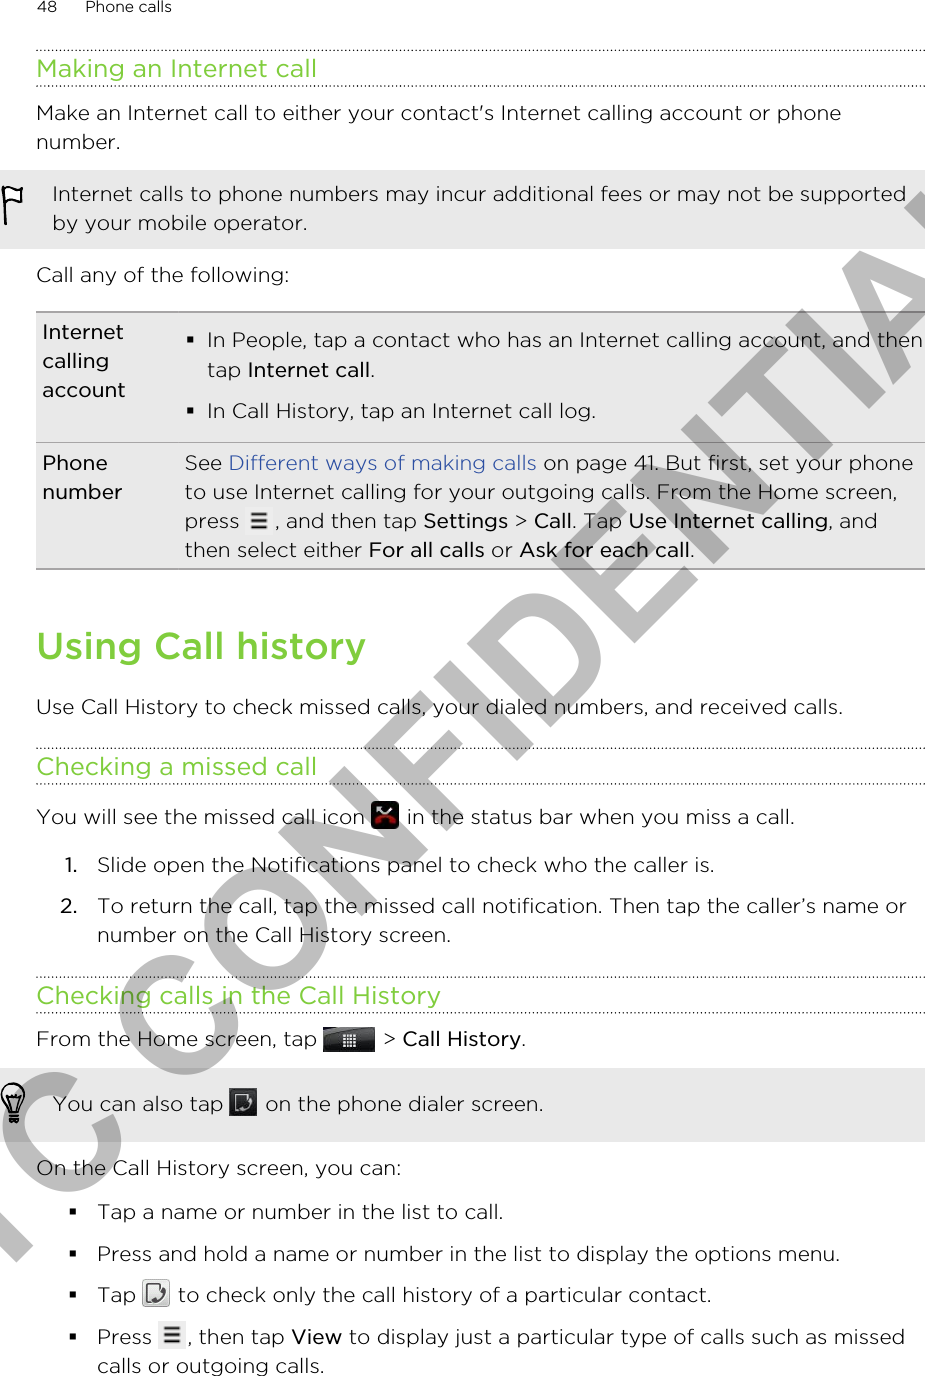 Making an Internet callMake an Internet call to either your contact&apos;s Internet calling account or phonenumber.Internet calls to phone numbers may incur additional fees or may not be supportedby your mobile operator.Call any of the following:Internetcallingaccount§In People, tap a contact who has an Internet calling account, and thentap Internet call.§In Call History, tap an Internet call log.PhonenumberSee Different ways of making calls on page 41. But first, set your phoneto use Internet calling for your outgoing calls. From the Home screen,press  , and then tap Settings &gt; Call. Tap Use Internet calling, andthen select either For all calls or Ask for each call.Using Call historyUse Call History to check missed calls, your dialed numbers, and received calls.Checking a missed callYou will see the missed call icon   in the status bar when you miss a call.1. Slide open the Notifications panel to check who the caller is.2. To return the call, tap the missed call notification. Then tap the caller’s name ornumber on the Call History screen.Checking calls in the Call HistoryFrom the Home screen, tap   &gt; Call History. You can also tap   on the phone dialer screen.On the Call History screen, you can:§Tap a name or number in the list to call.§Press and hold a name or number in the list to display the options menu.§Tap   to check only the call history of a particular contact.§Press  , then tap View to display just a particular type of calls such as missedcalls or outgoing calls.48 Phone callsHTC CONFIDENTIAL